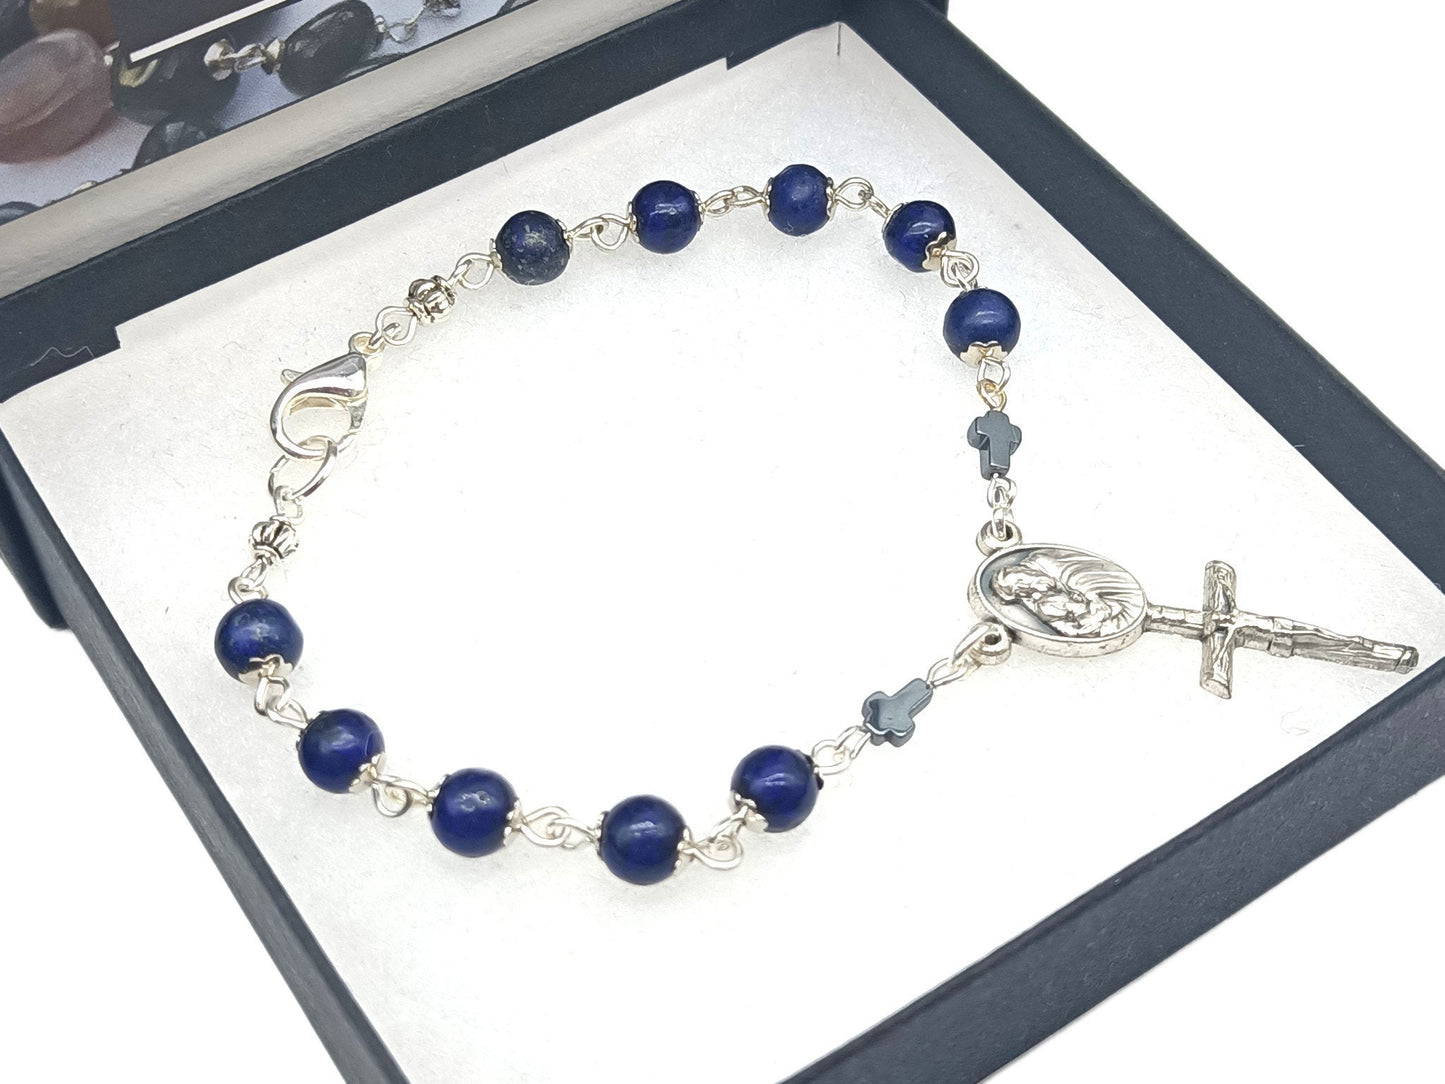 God the Father Lapis Lazuli unique rosary beads single decade with silver crucifix and lobster clasp.